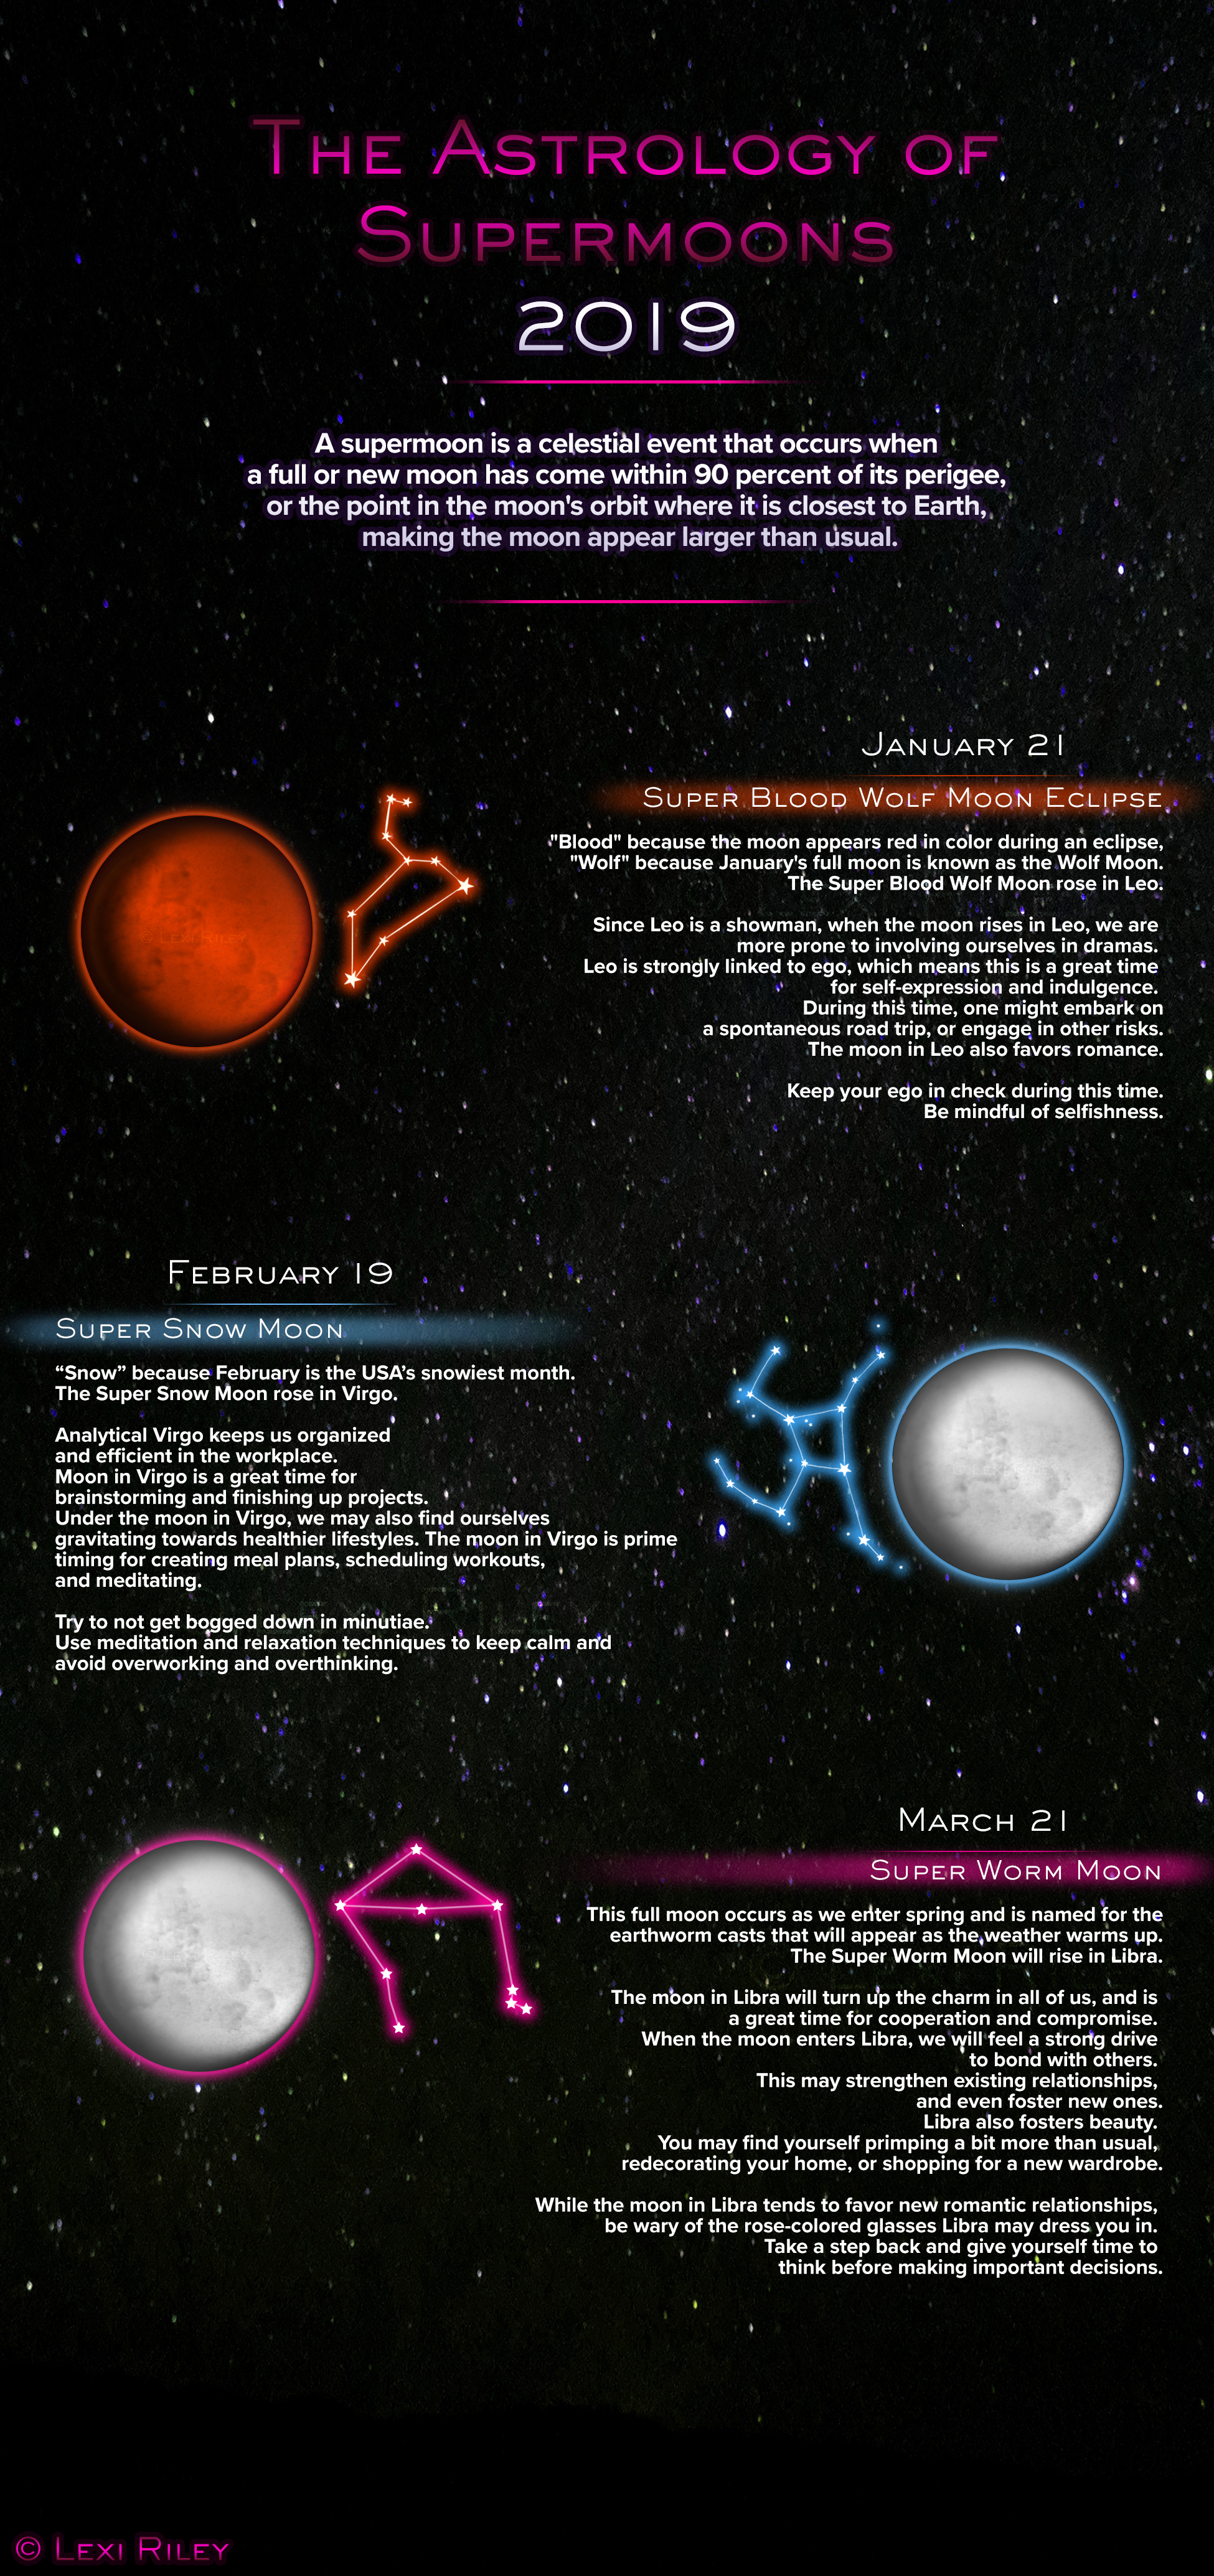 The Astrology of Supermoons 2019 Infographic. Created by The Signal reporter Lexi Riley.